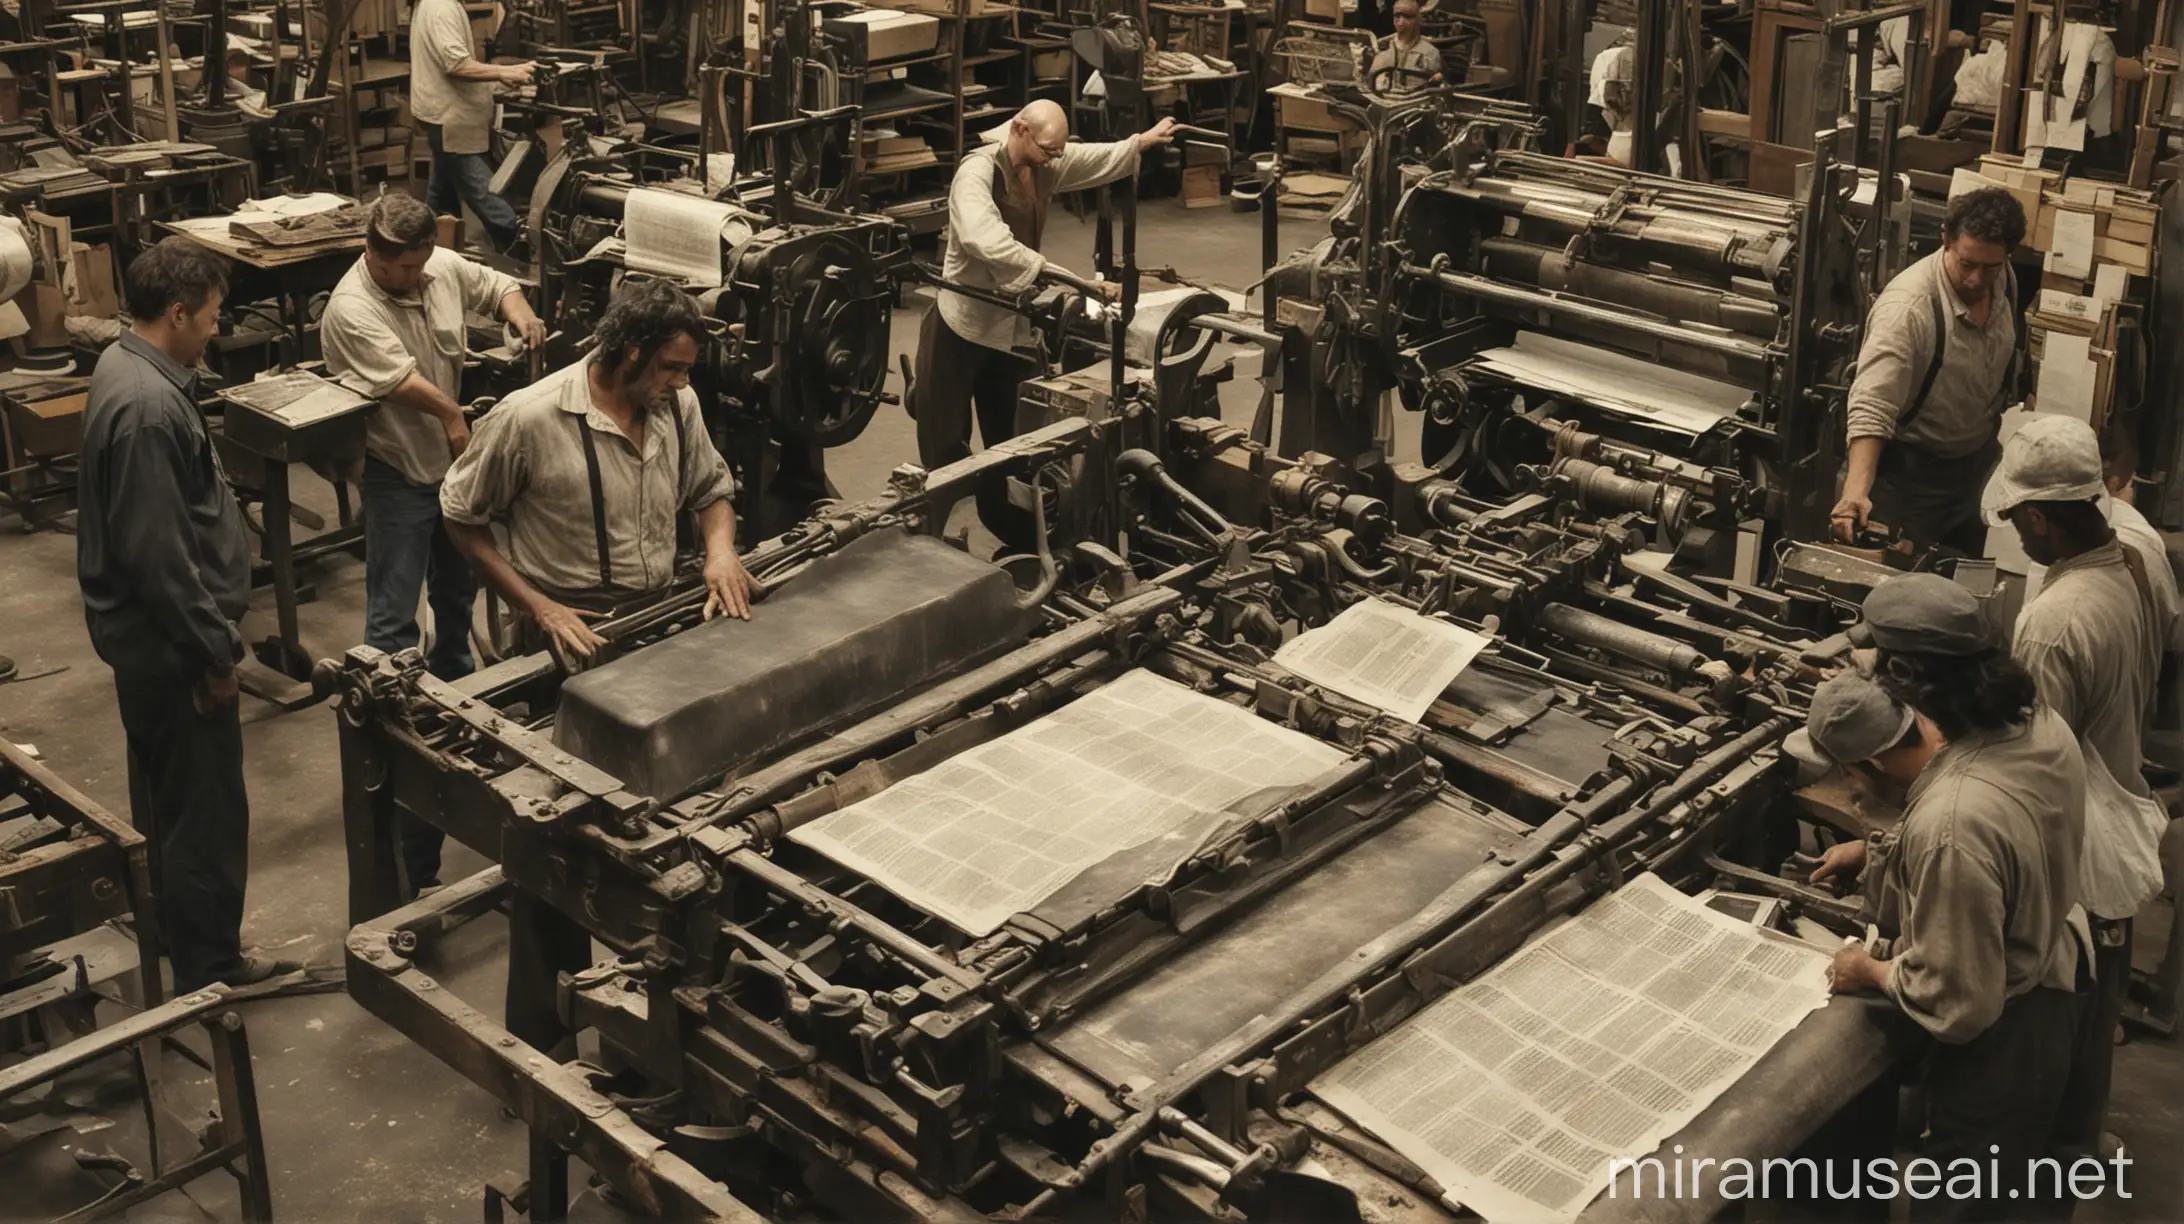 Busy Workers in a Printing Press